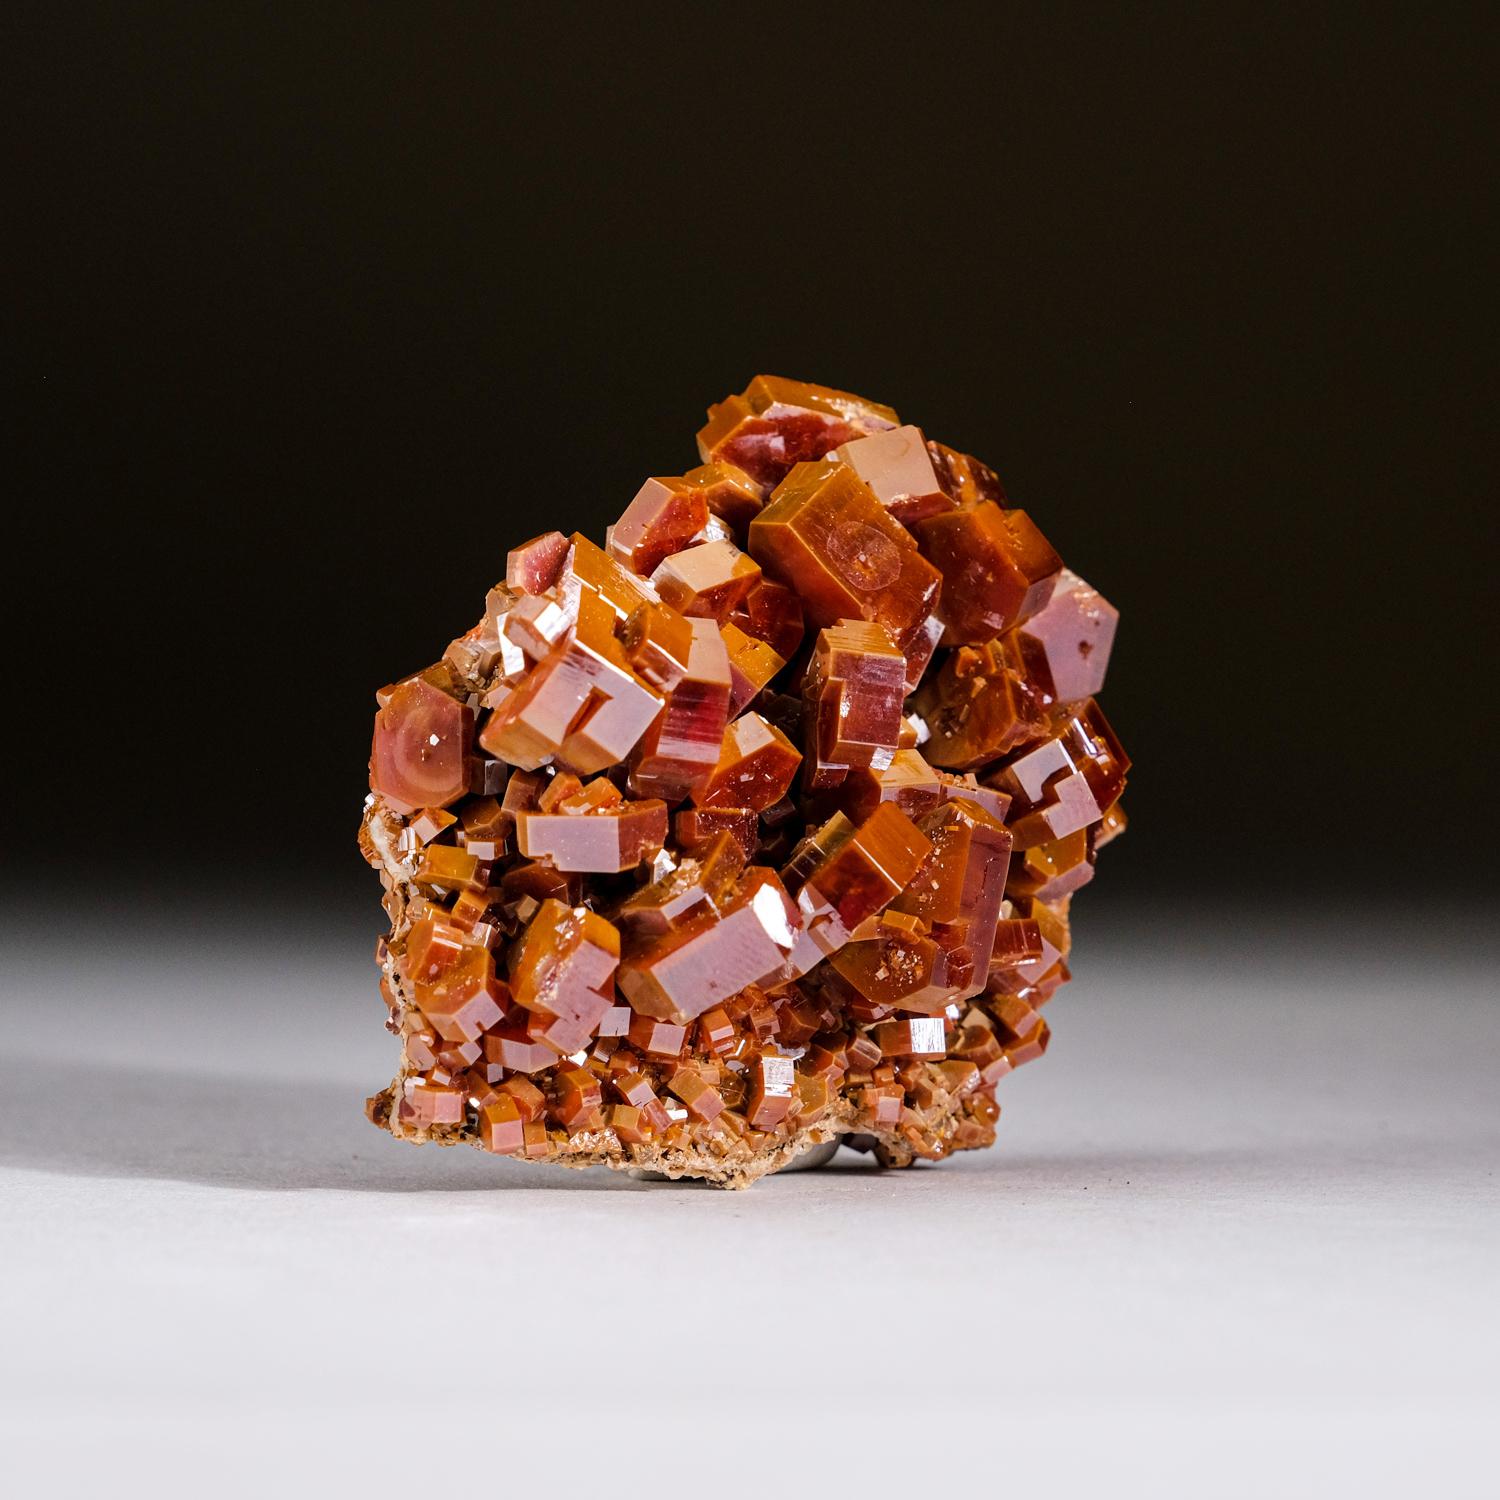 From Mibladen, Atlas Mountains, Khénifra Province, Morocco An exceptional world-class cluster of hexagonal brick-red Vanadinite crystals with glassy luster on limonite matrix. These large well-defined and undamaged crystals, are fully terminated